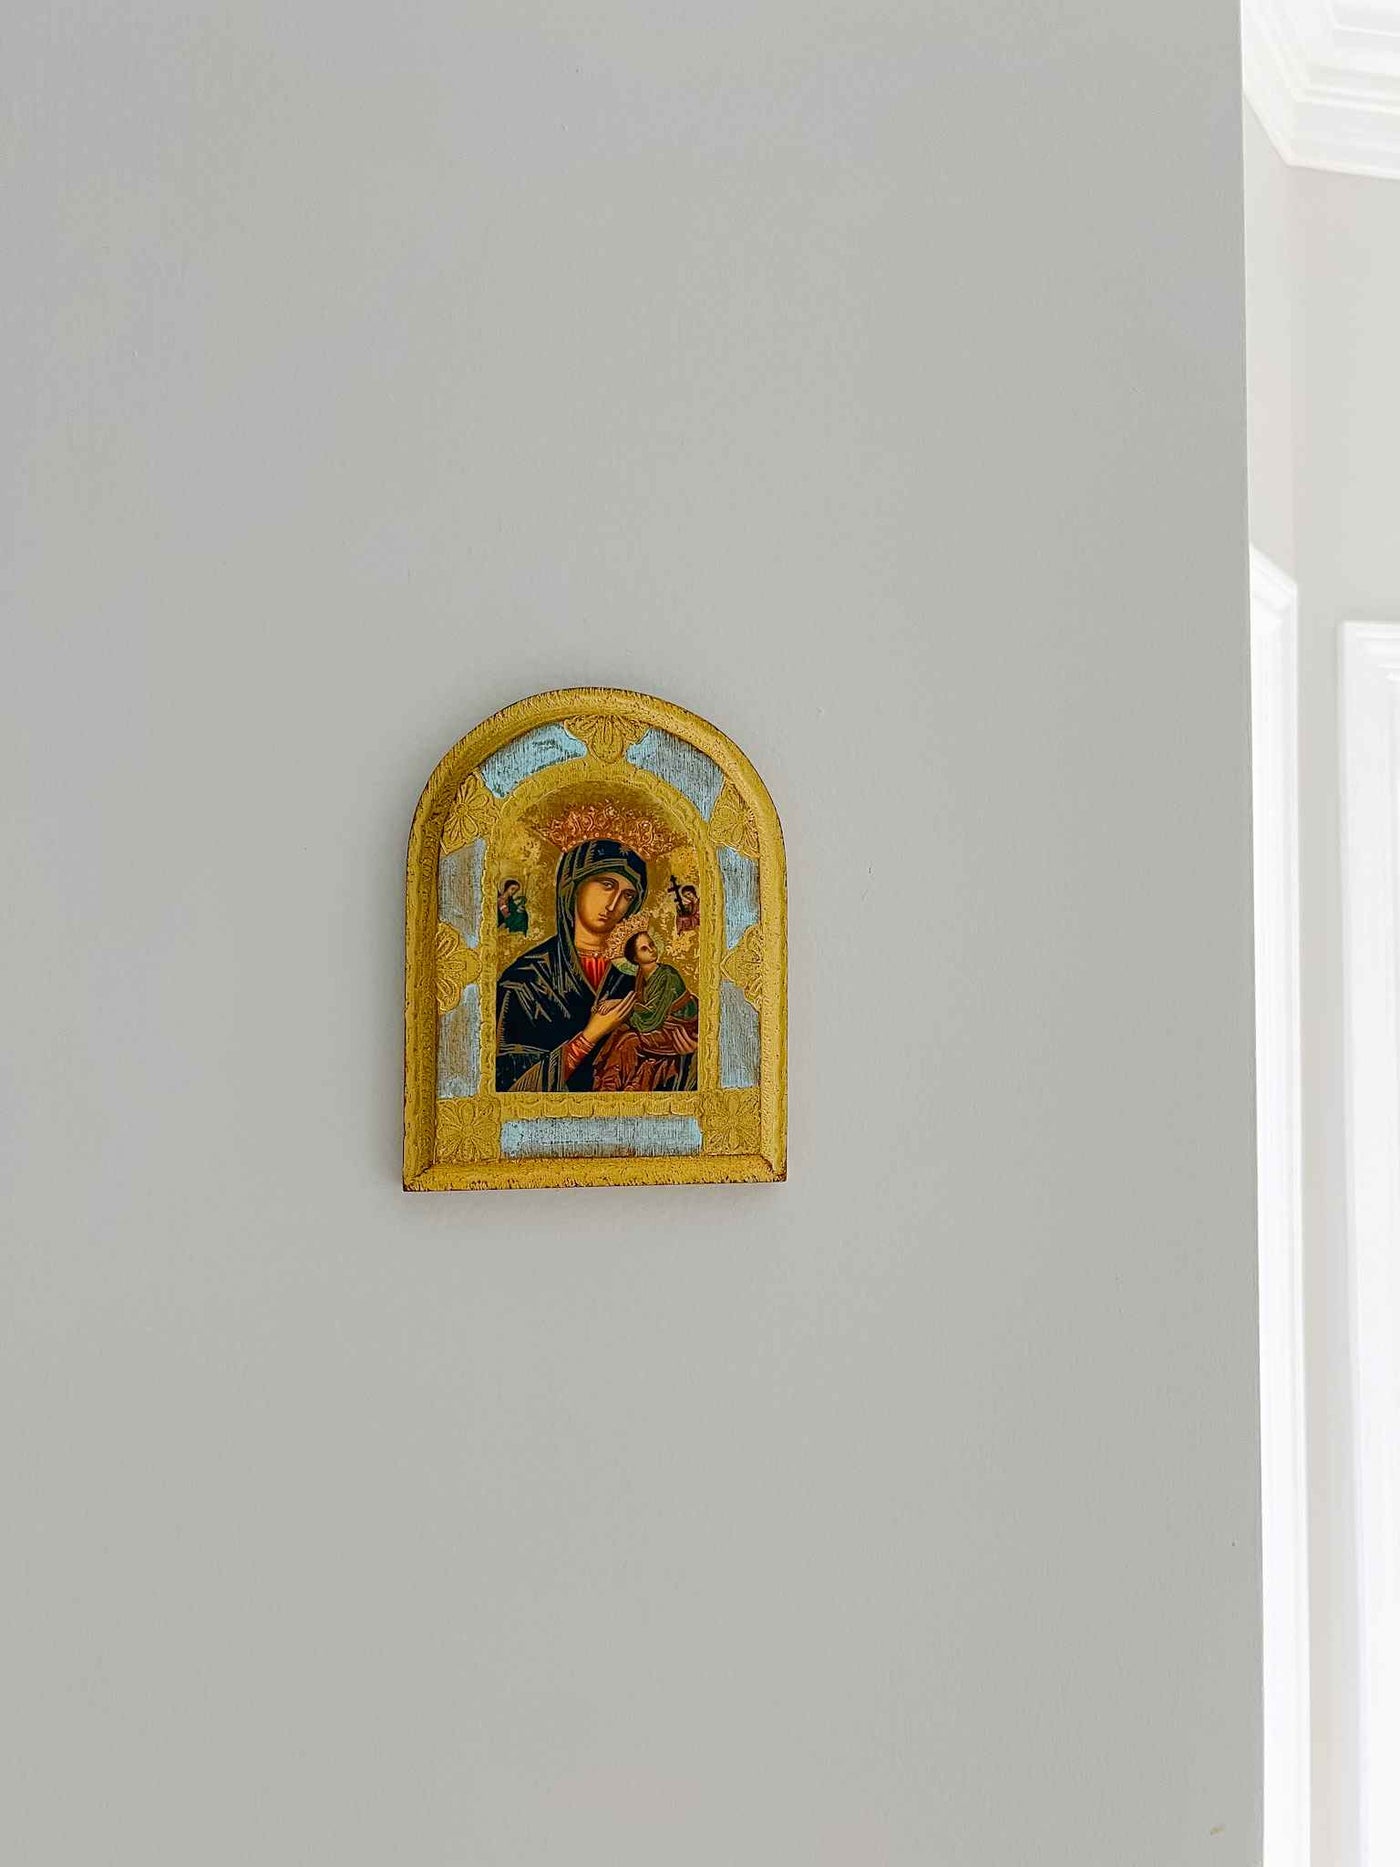 Our Lady of Perpetual Help - Petite Plaque